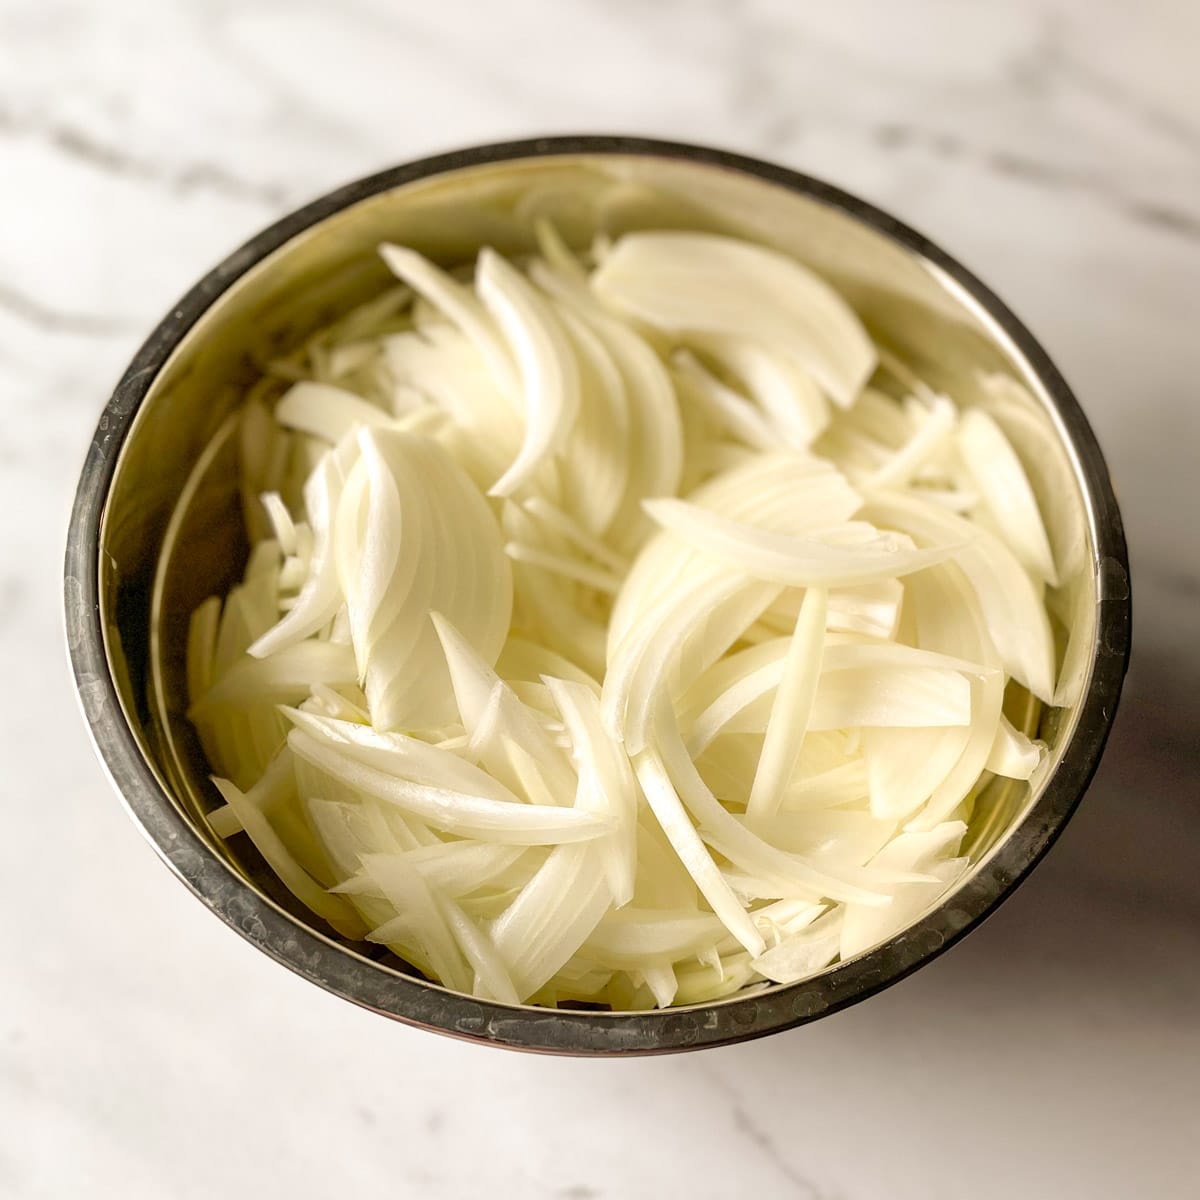 Sliced onions sit in a metal bowl.